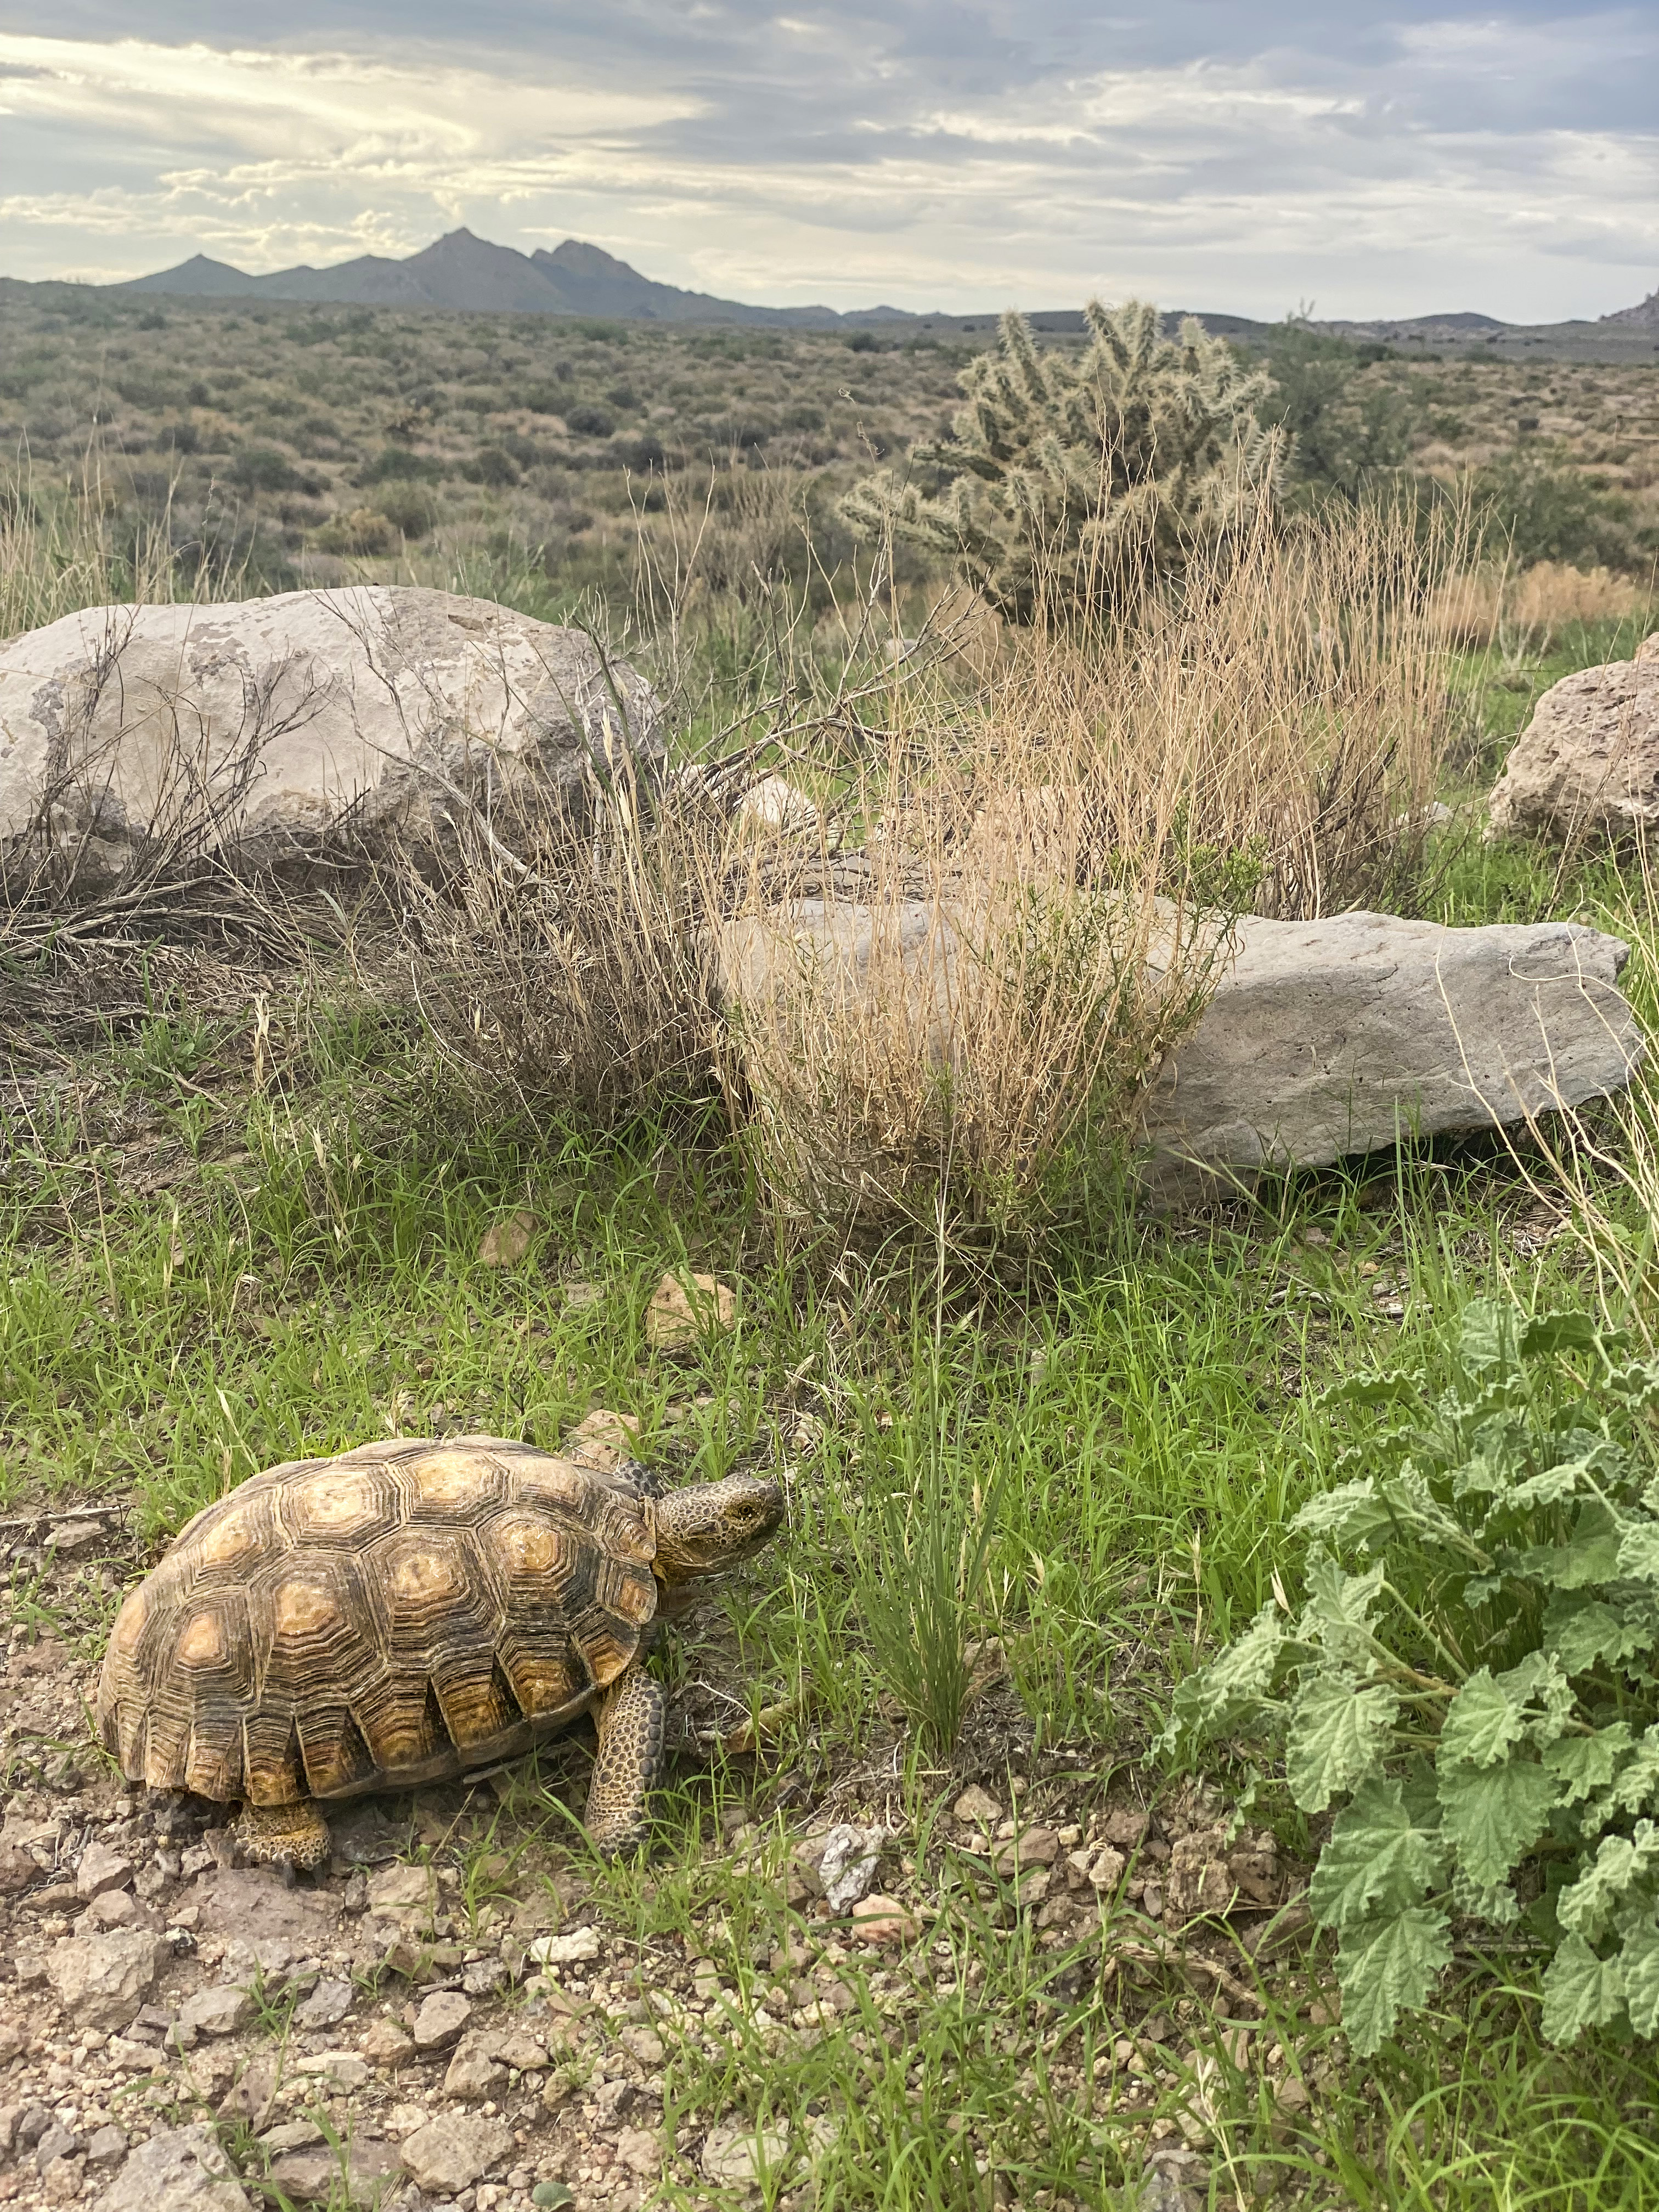 A desert tortoise walking along a gravel patch next to green grass in the context of a desert landscape with new plant growth